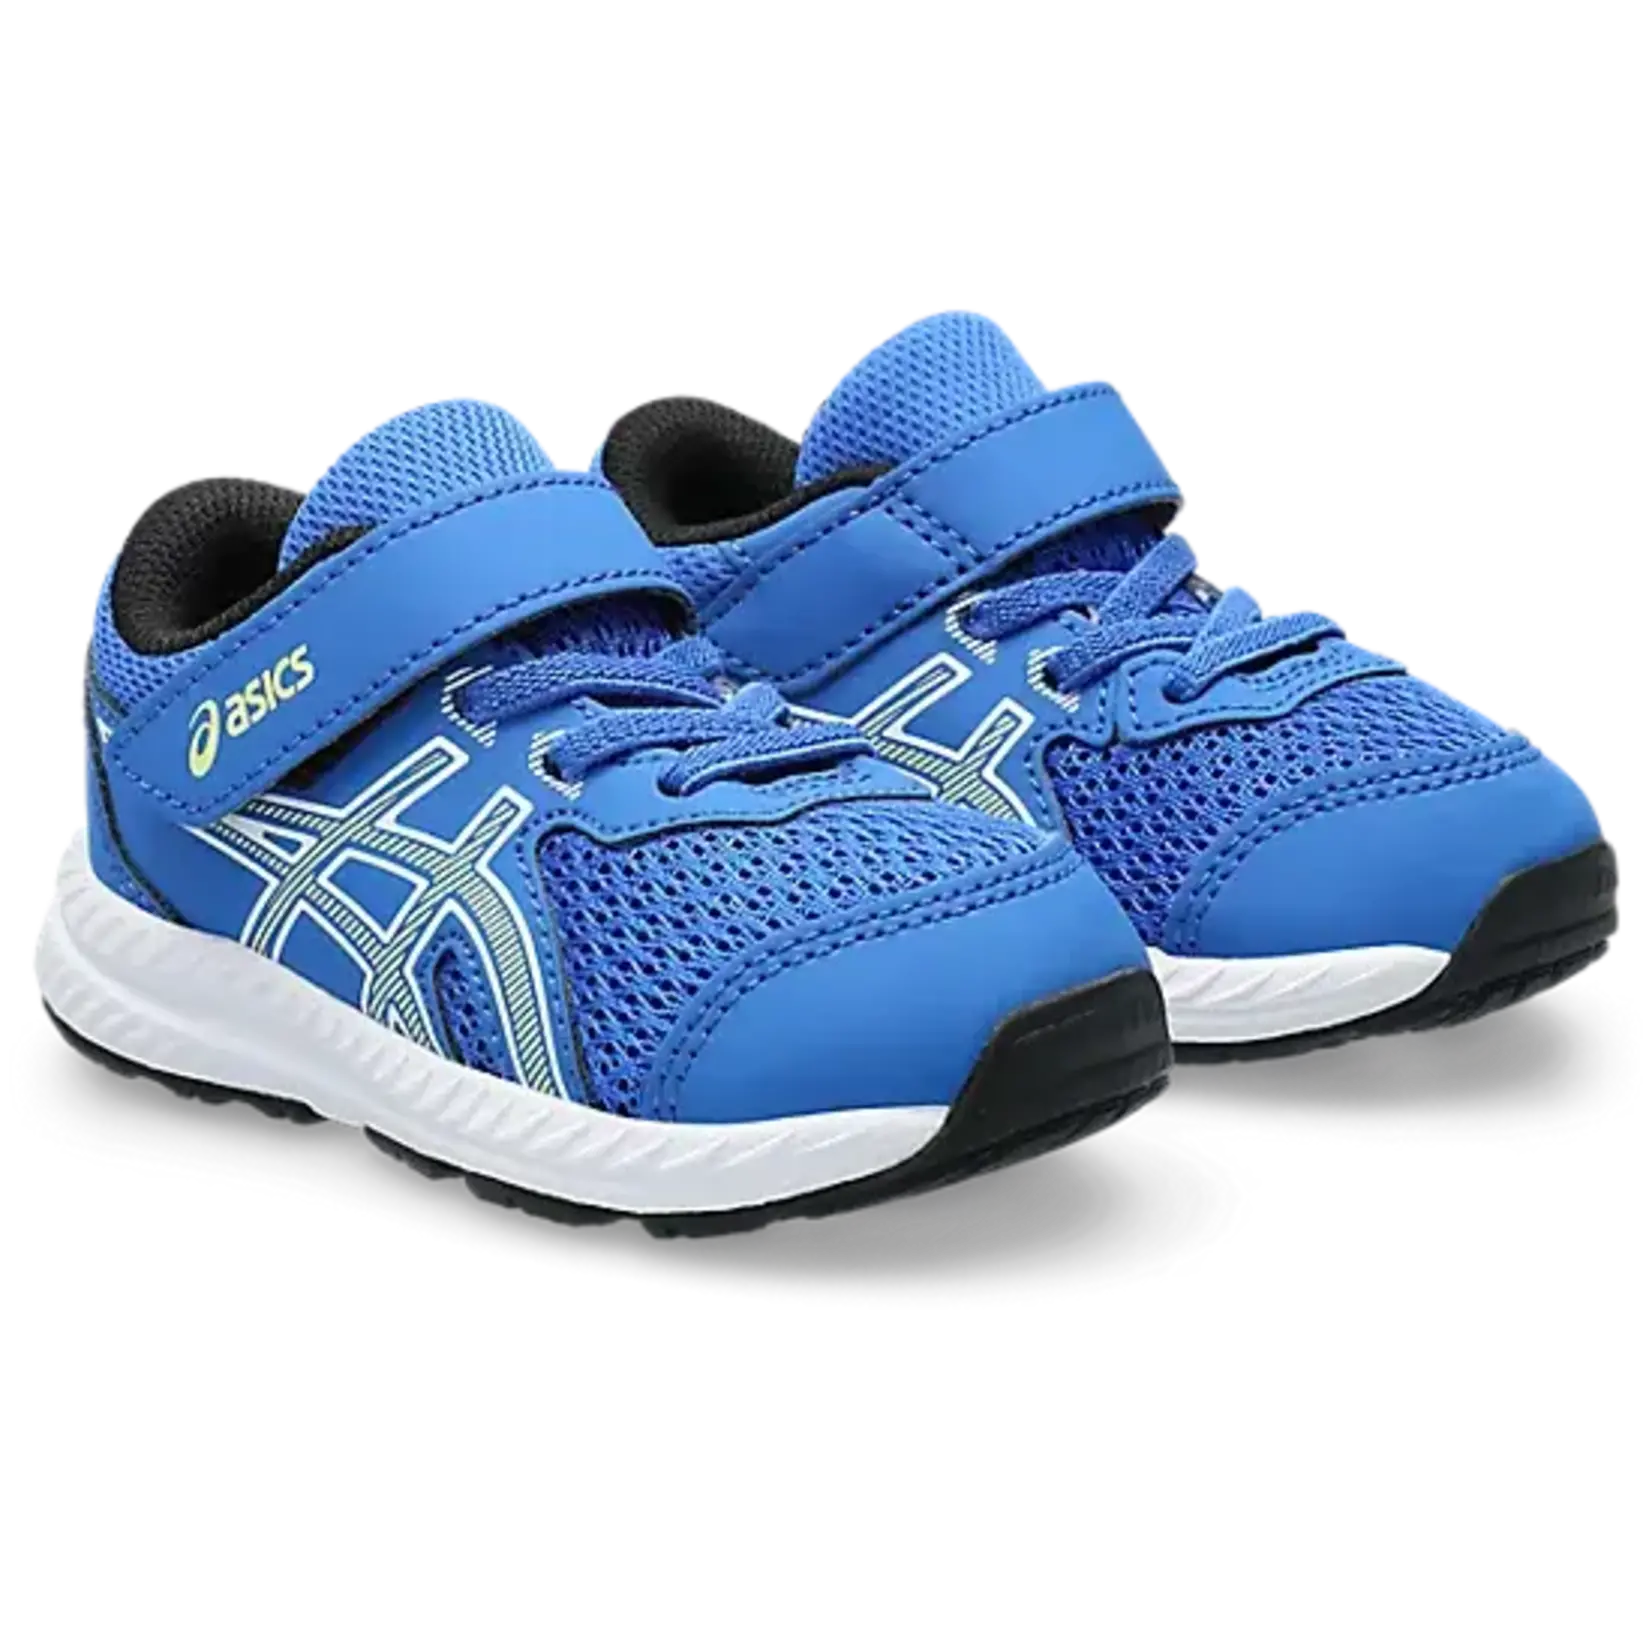 Asics ASICS - Running shoes 'Contend 8 TS -  Illusion blue Glow yellow'